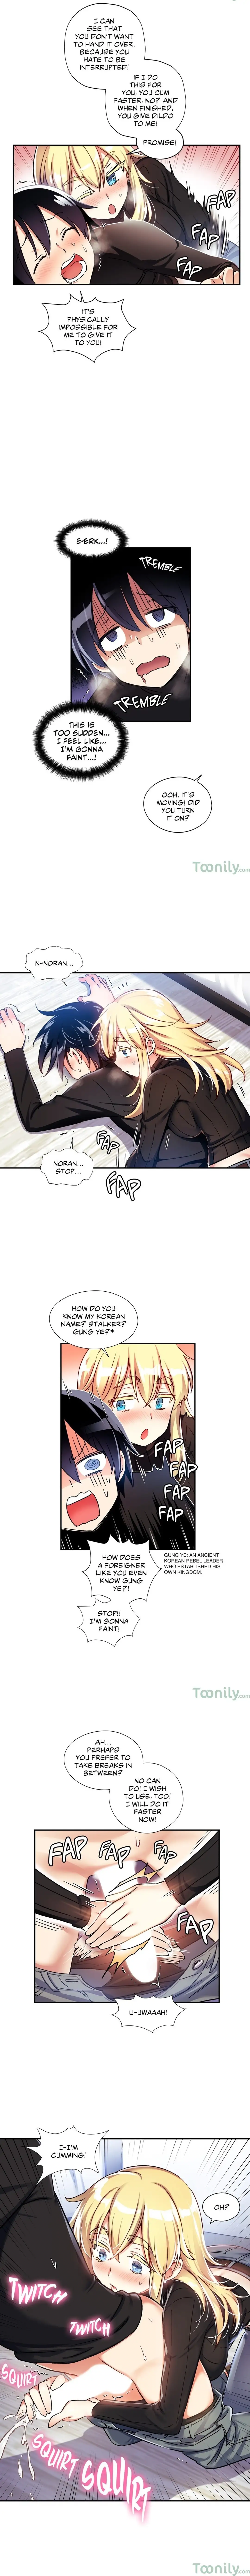 Under Observation My First Loves and I - Chapter 8 Page 5